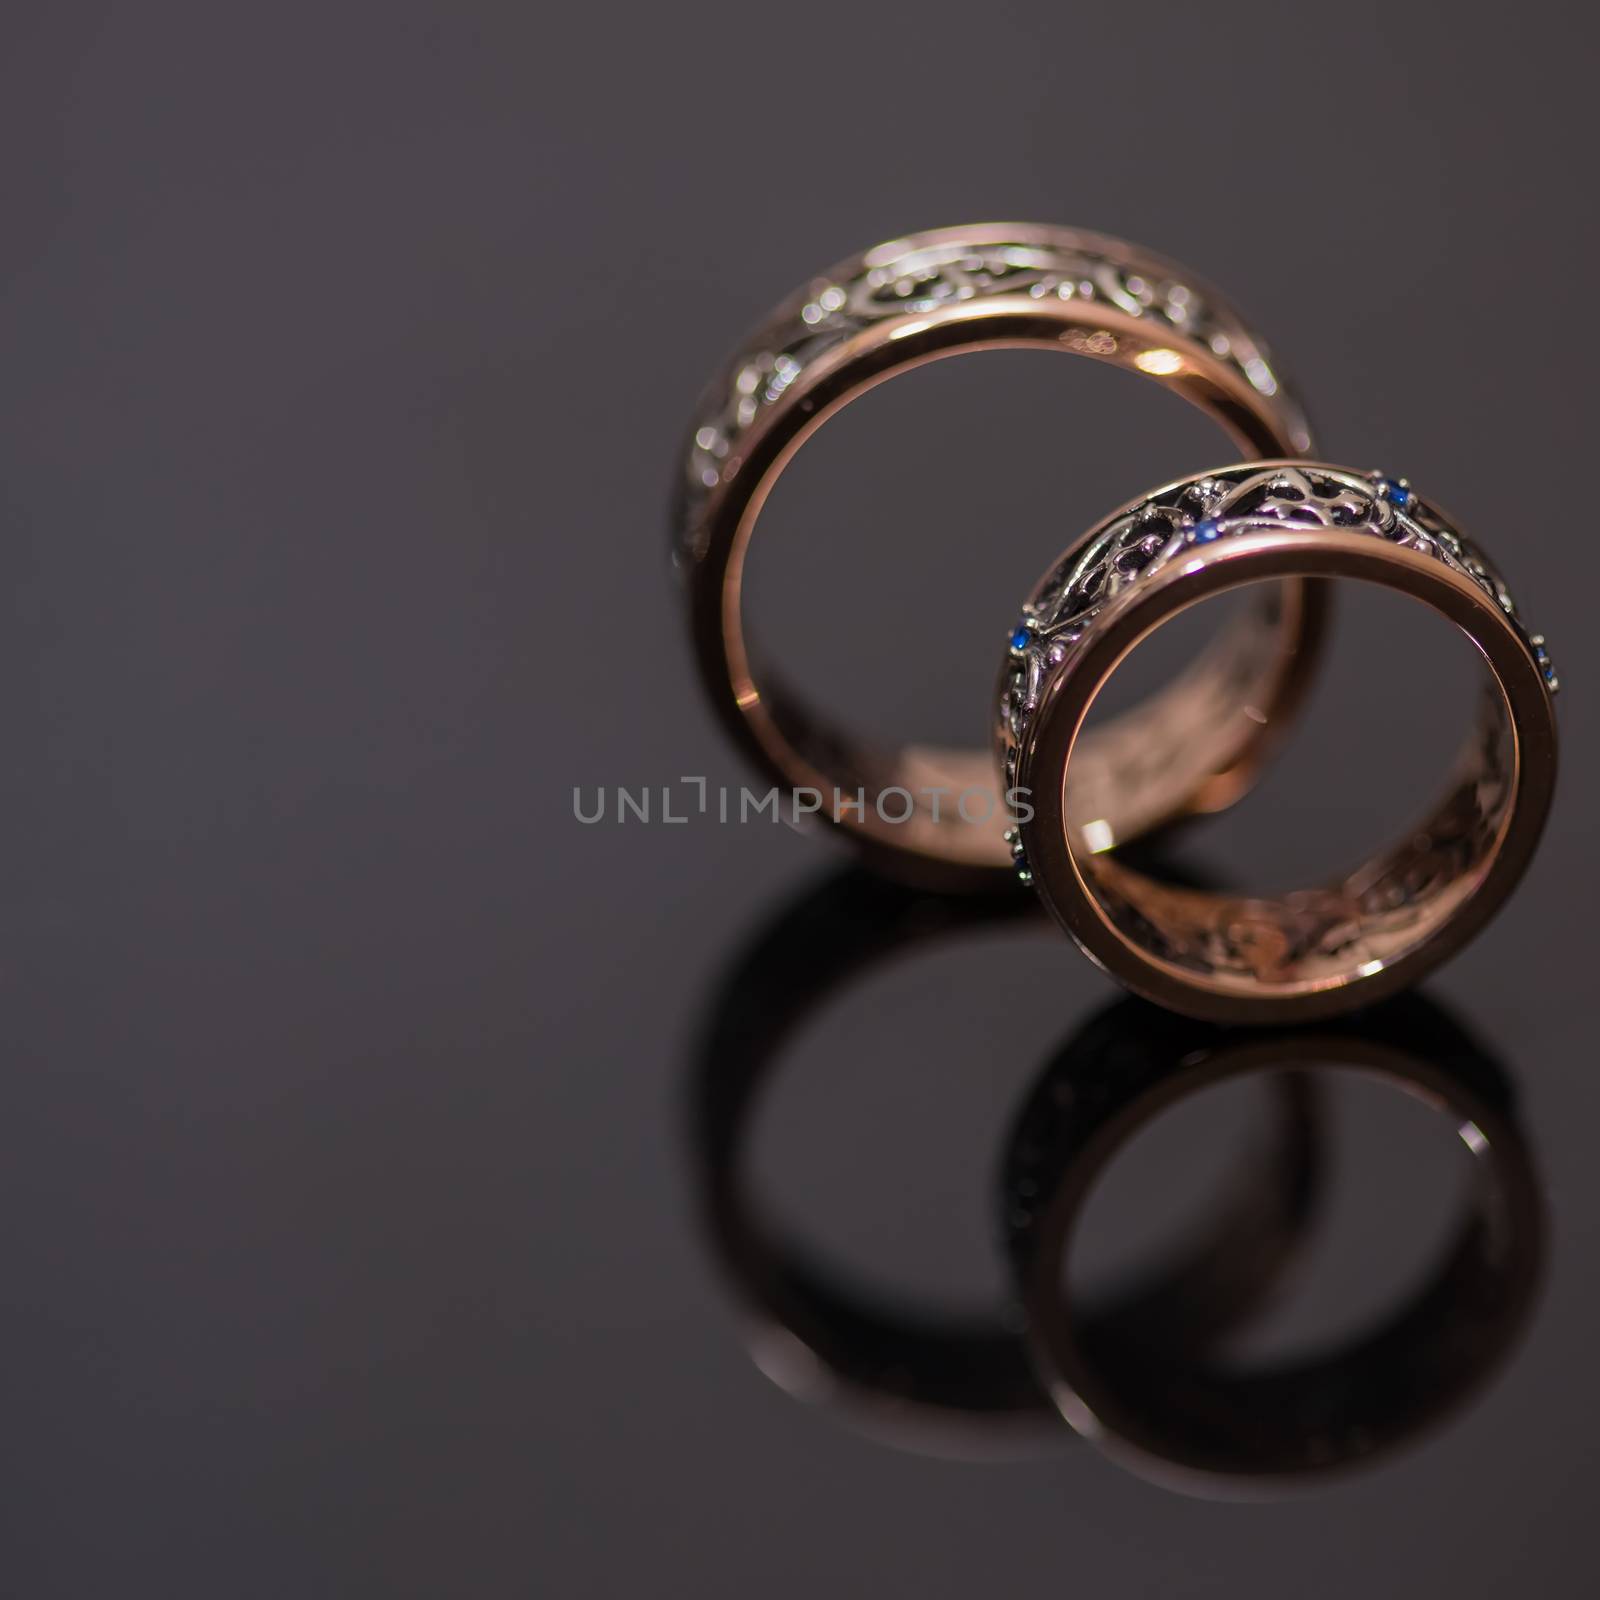 Two wedding rings in infinity sign on black background. Love concept.